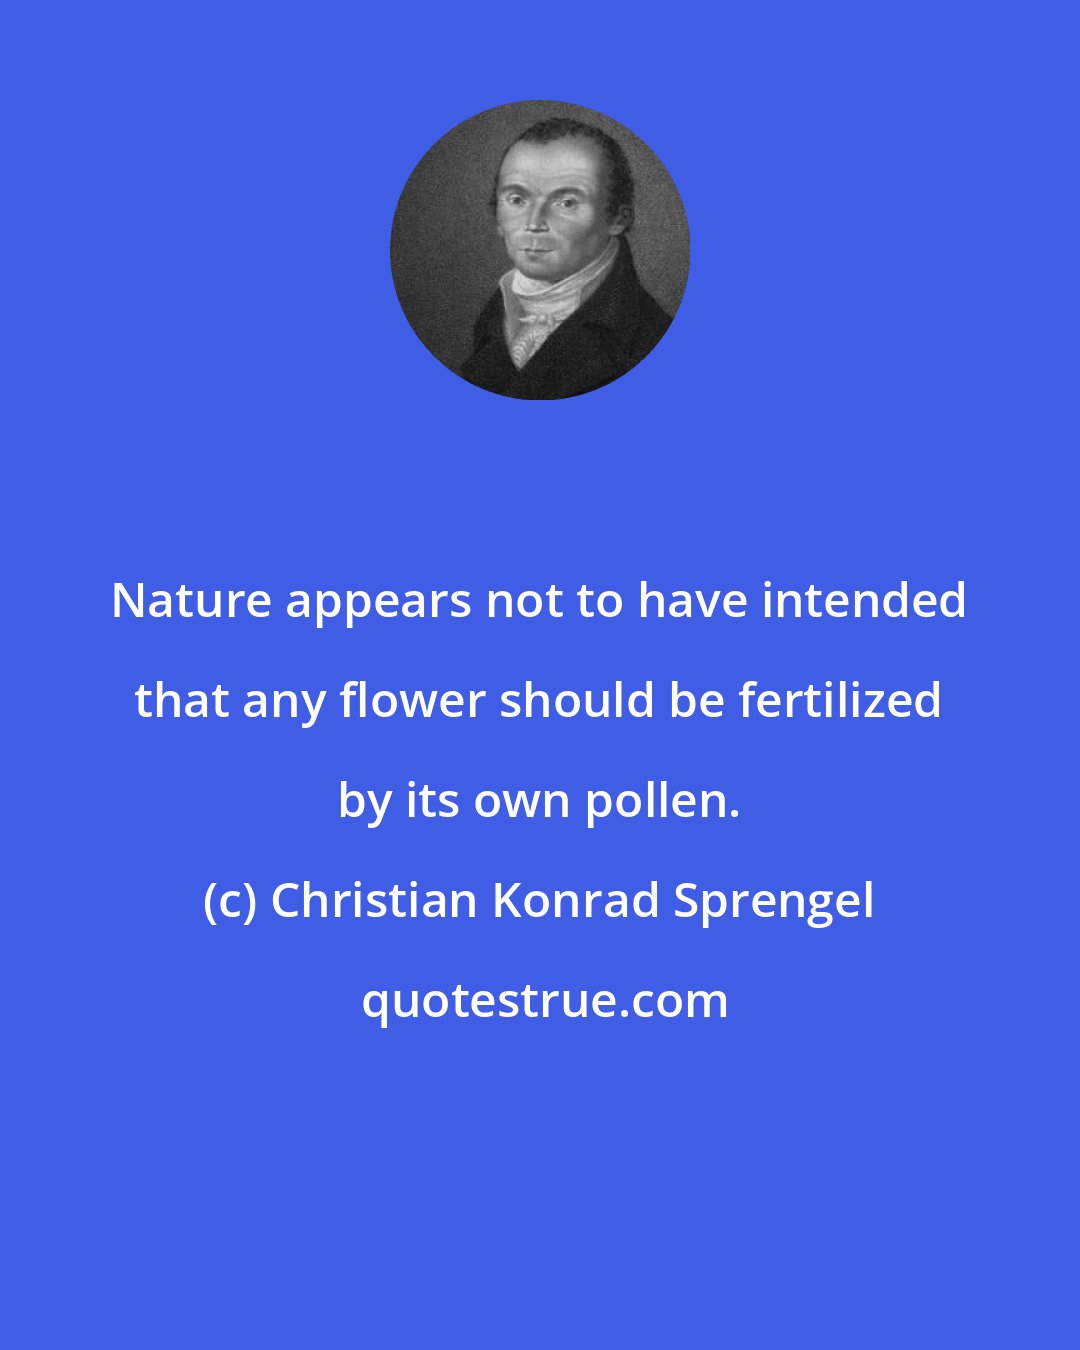 Christian Konrad Sprengel: Nature appears not to have intended that any flower should be fertilized by its own pollen.